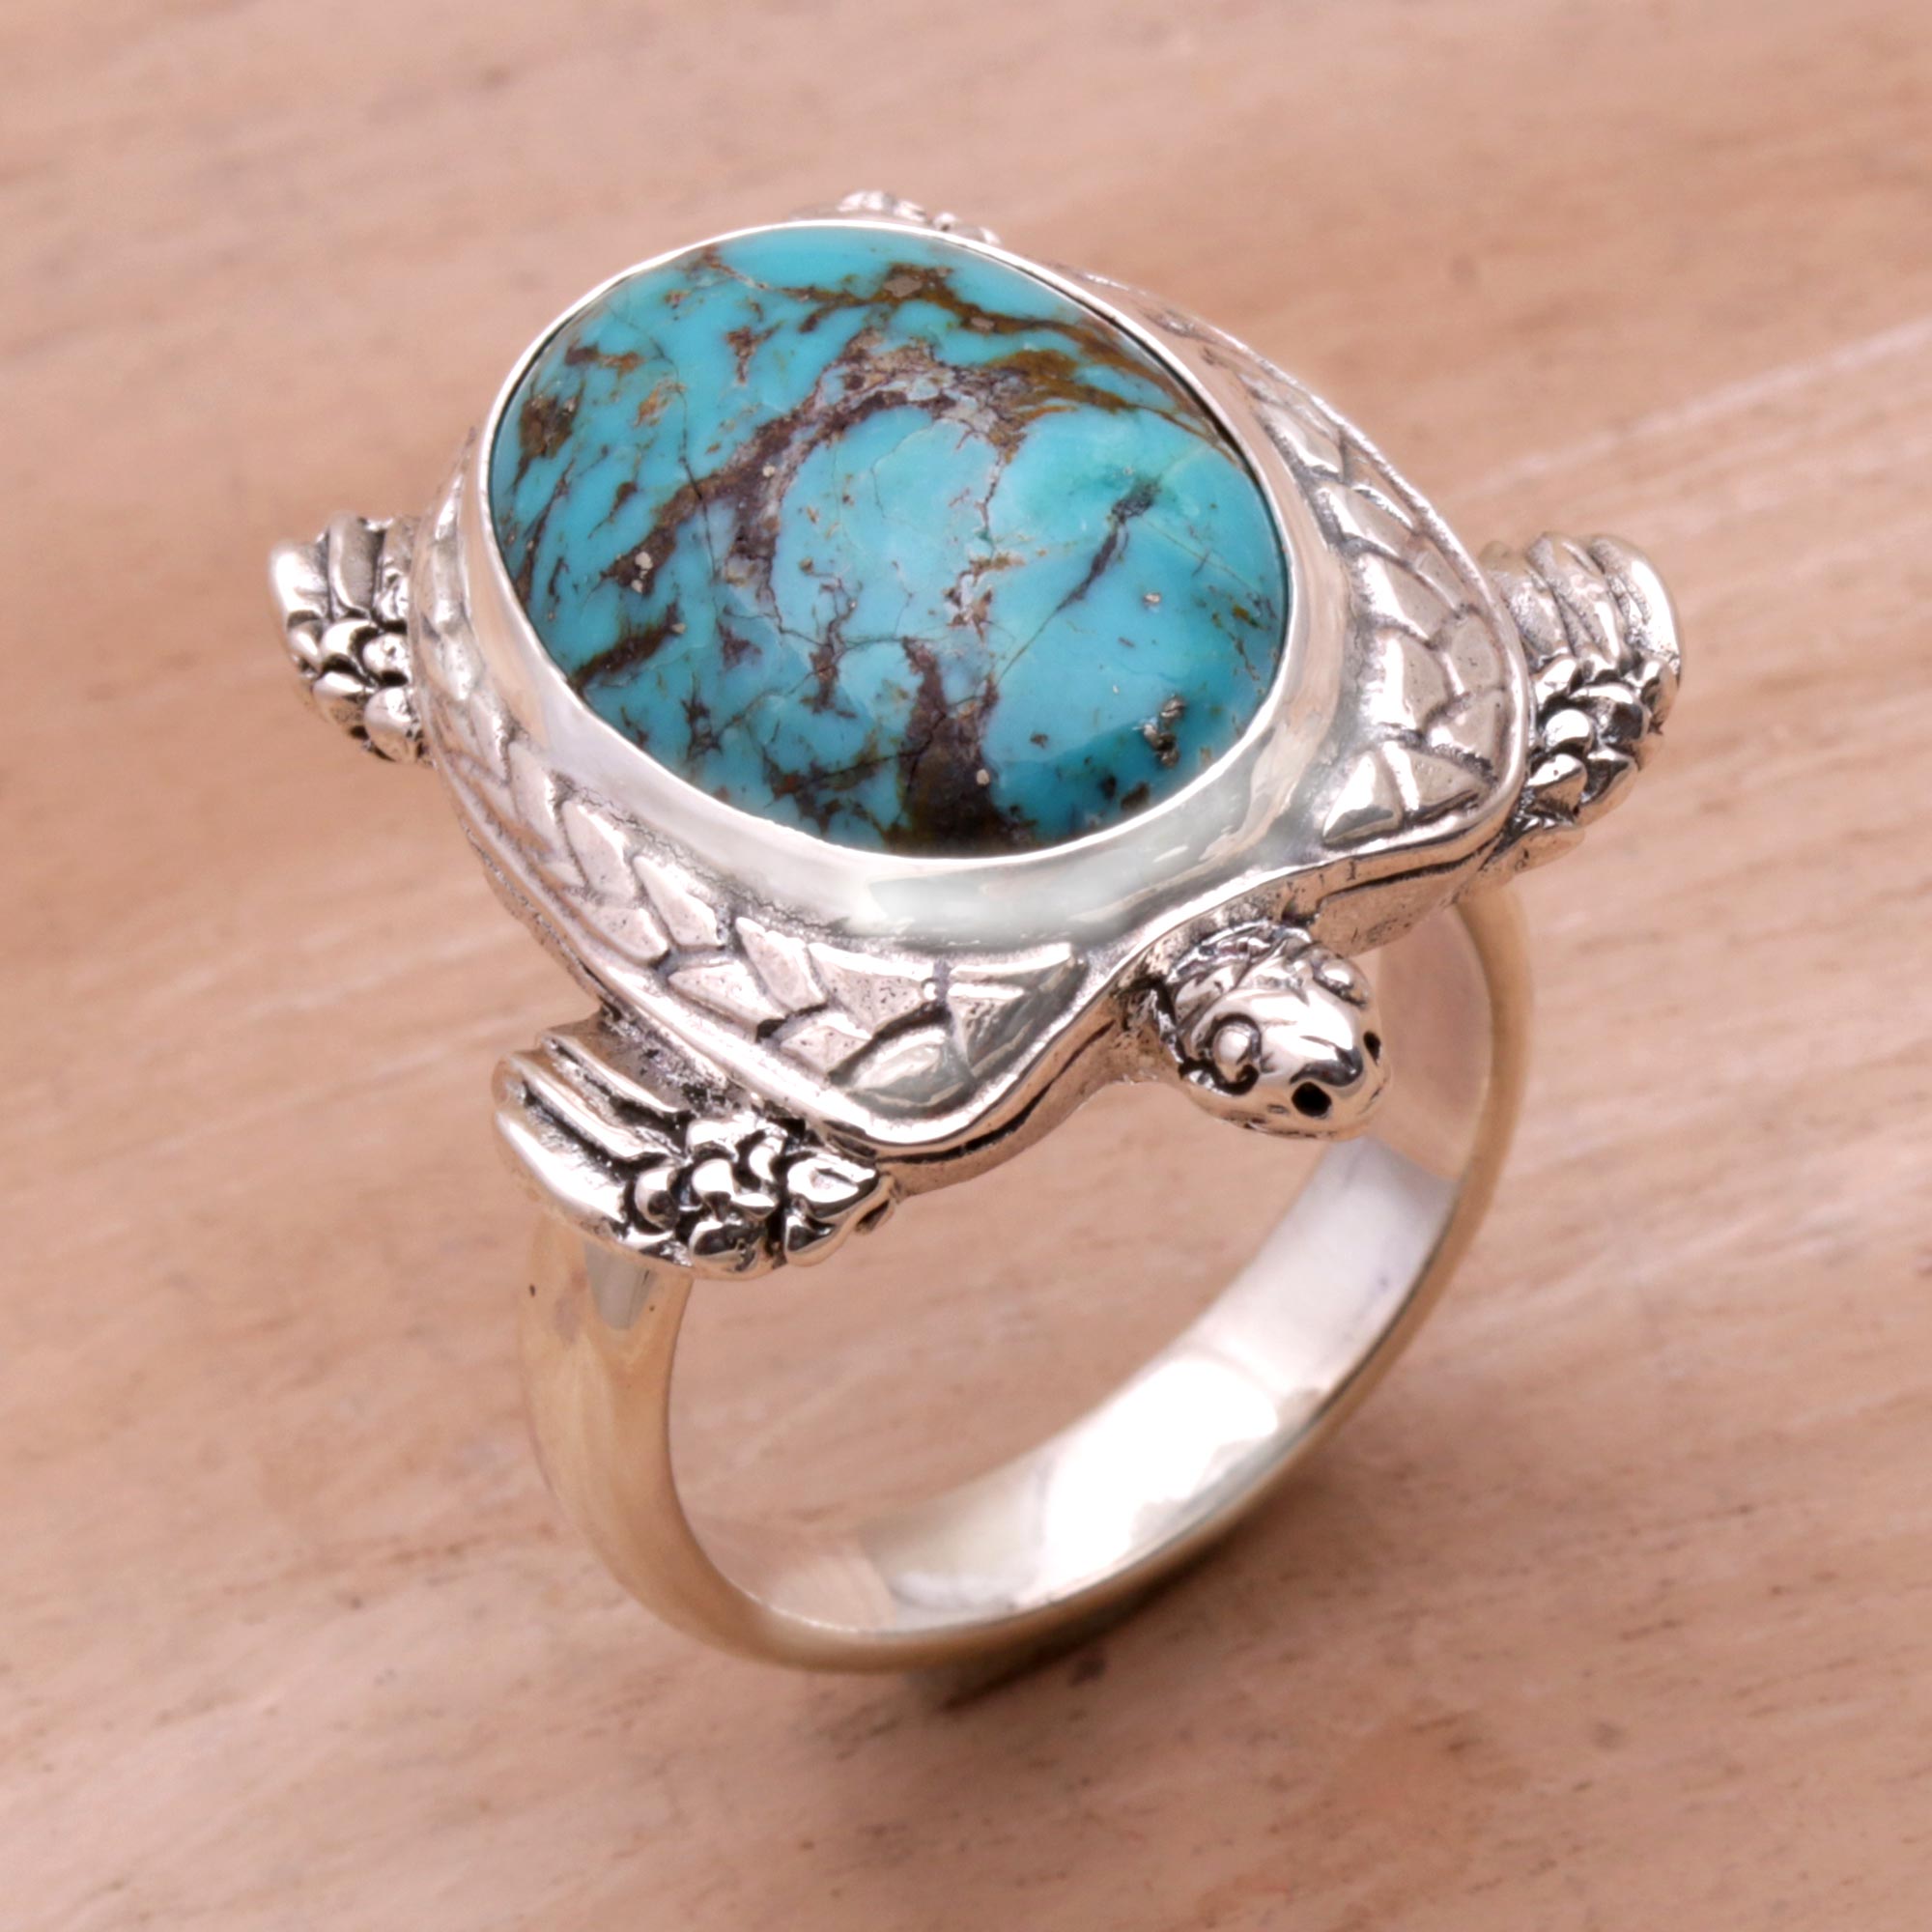 NOVICA Chelonia Turtle Men's Sterling Silver And Reconstituted Turquoise Ring - 8